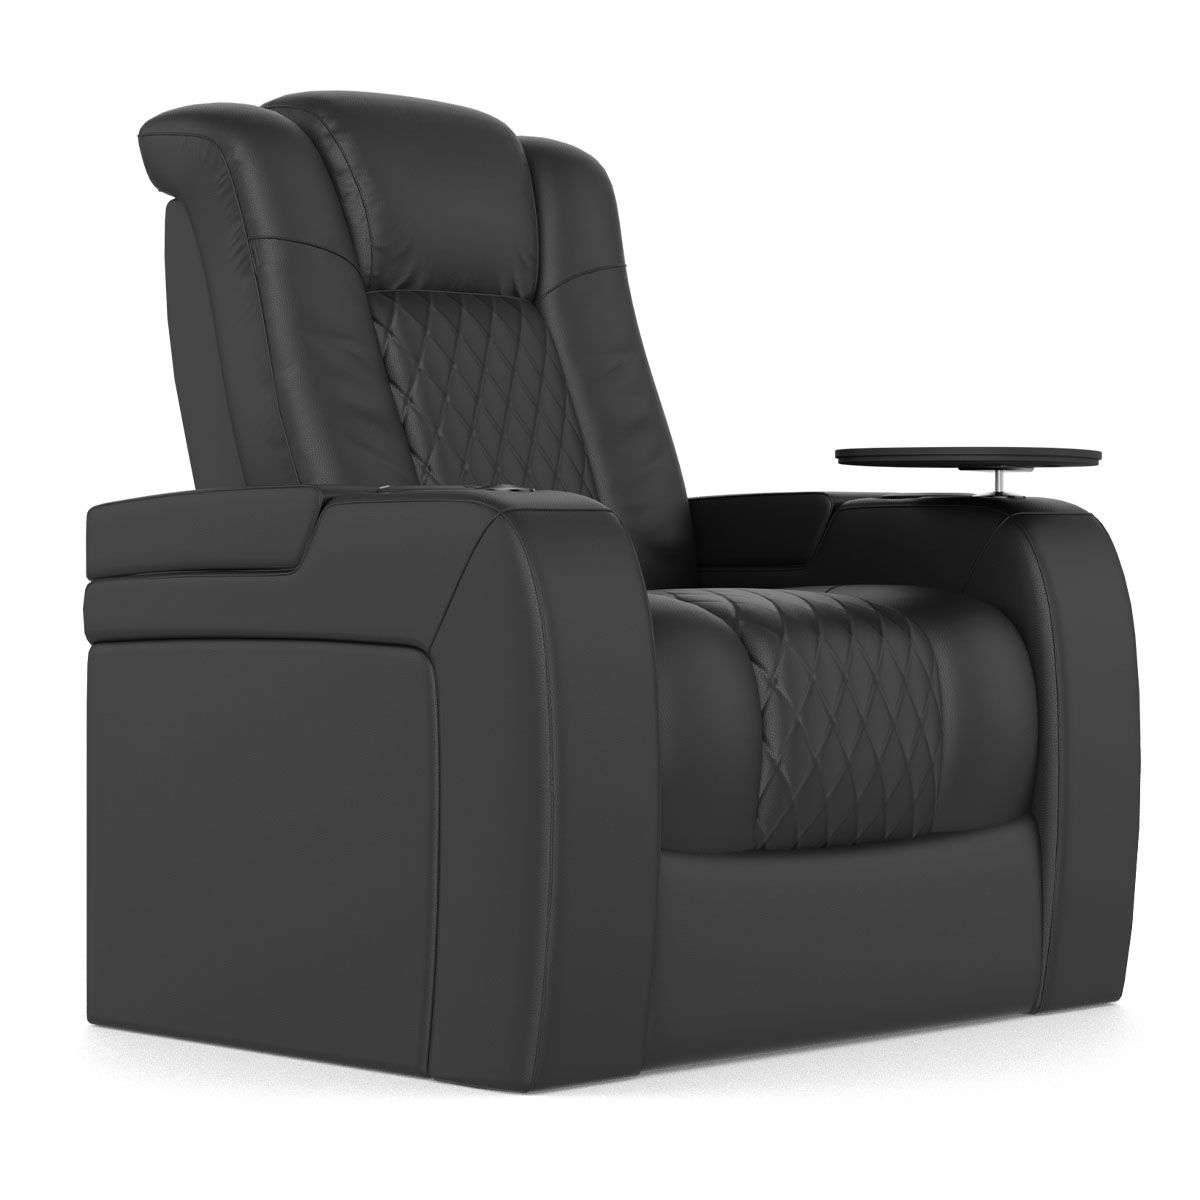 Audio Advice Revelation Home Theater Seating - angled side view of 2 arm chair with tray table